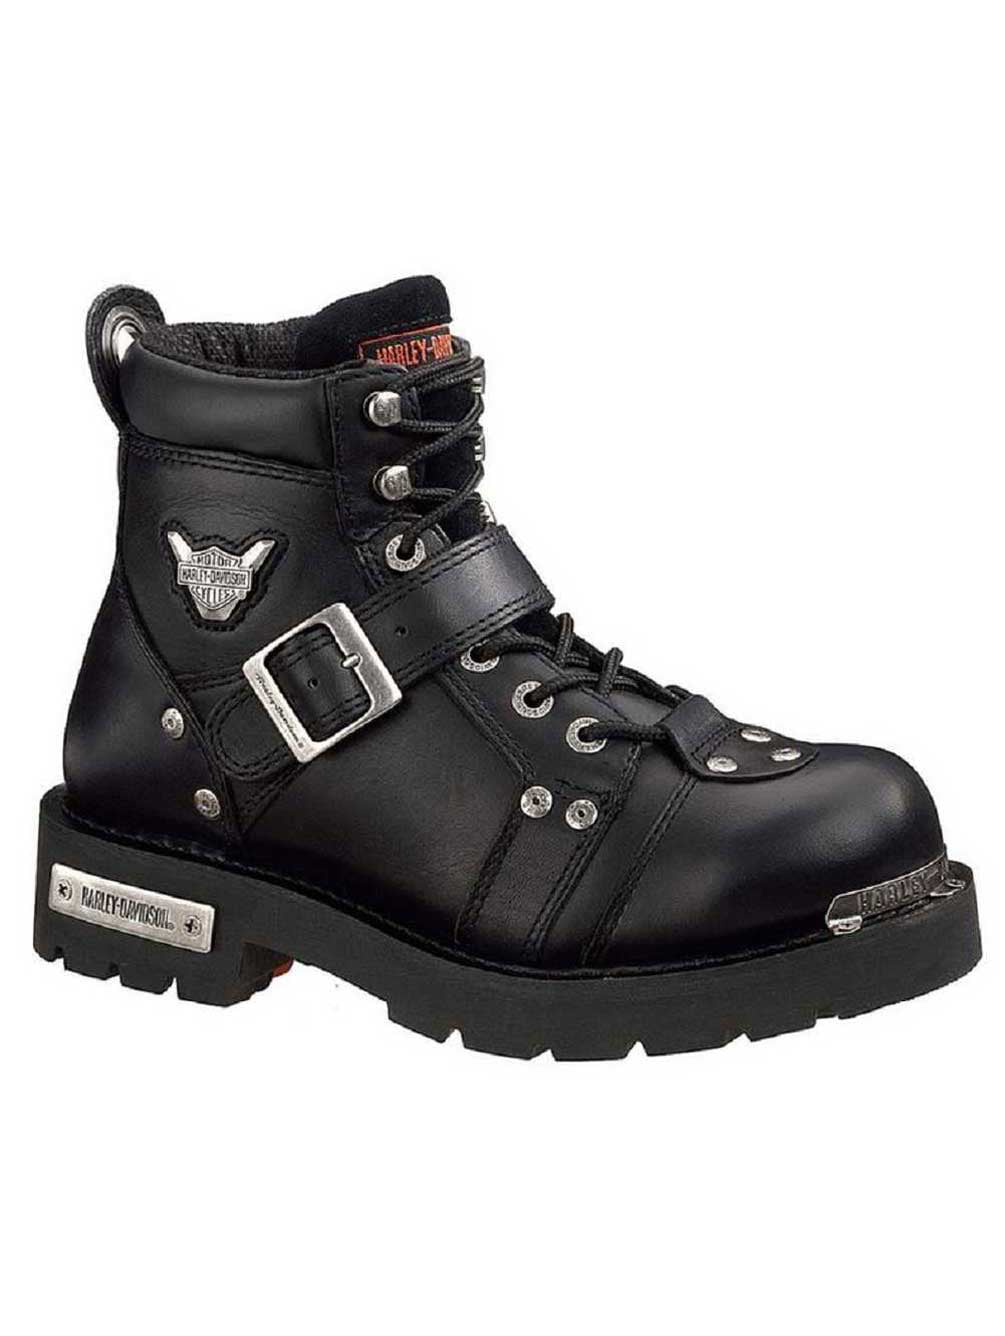 Harley Davidson Mens Boots Brake Buckle D91684 Lace-Up Zip-Up Buckle Leather